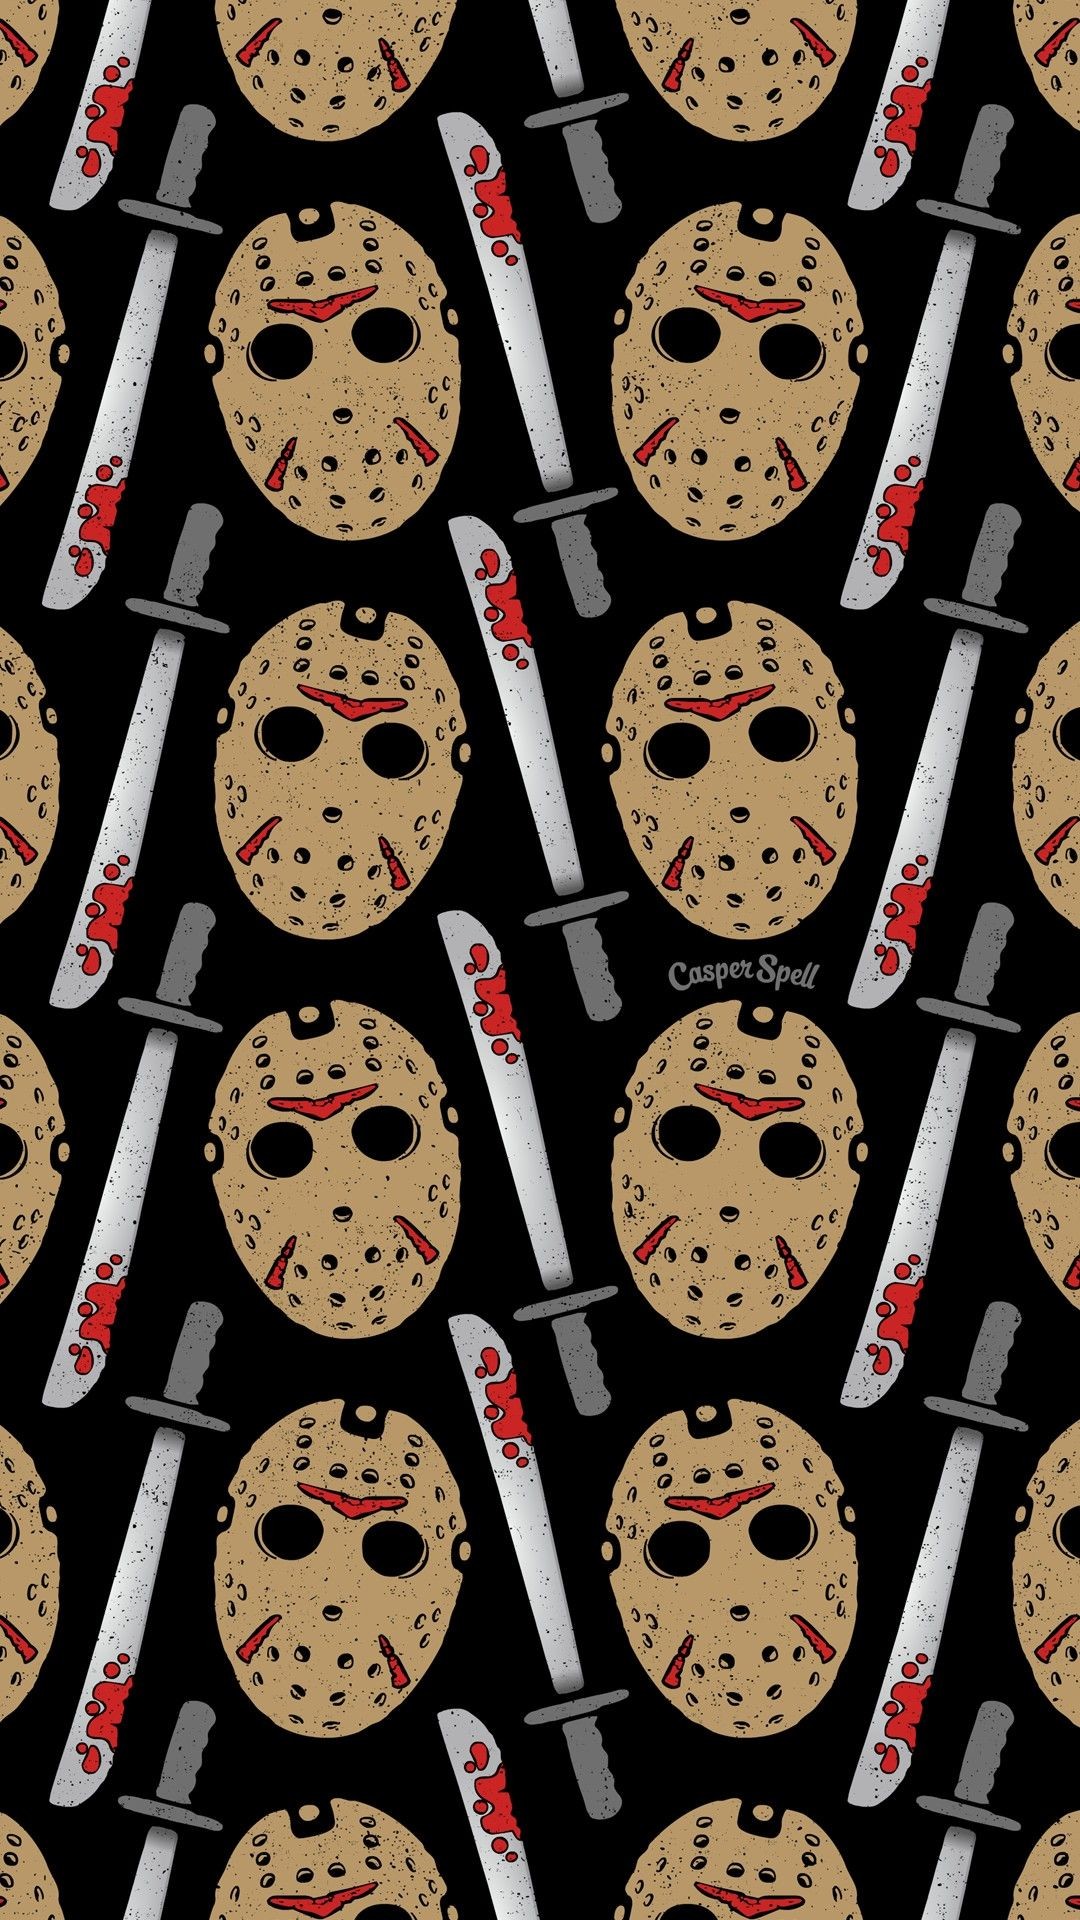 1080x1920 Friday the 13th Jason Voorhees repeat pattern art surface design  illustration background wallpaper patterns wallpapers backgrounds free  horror killer ...